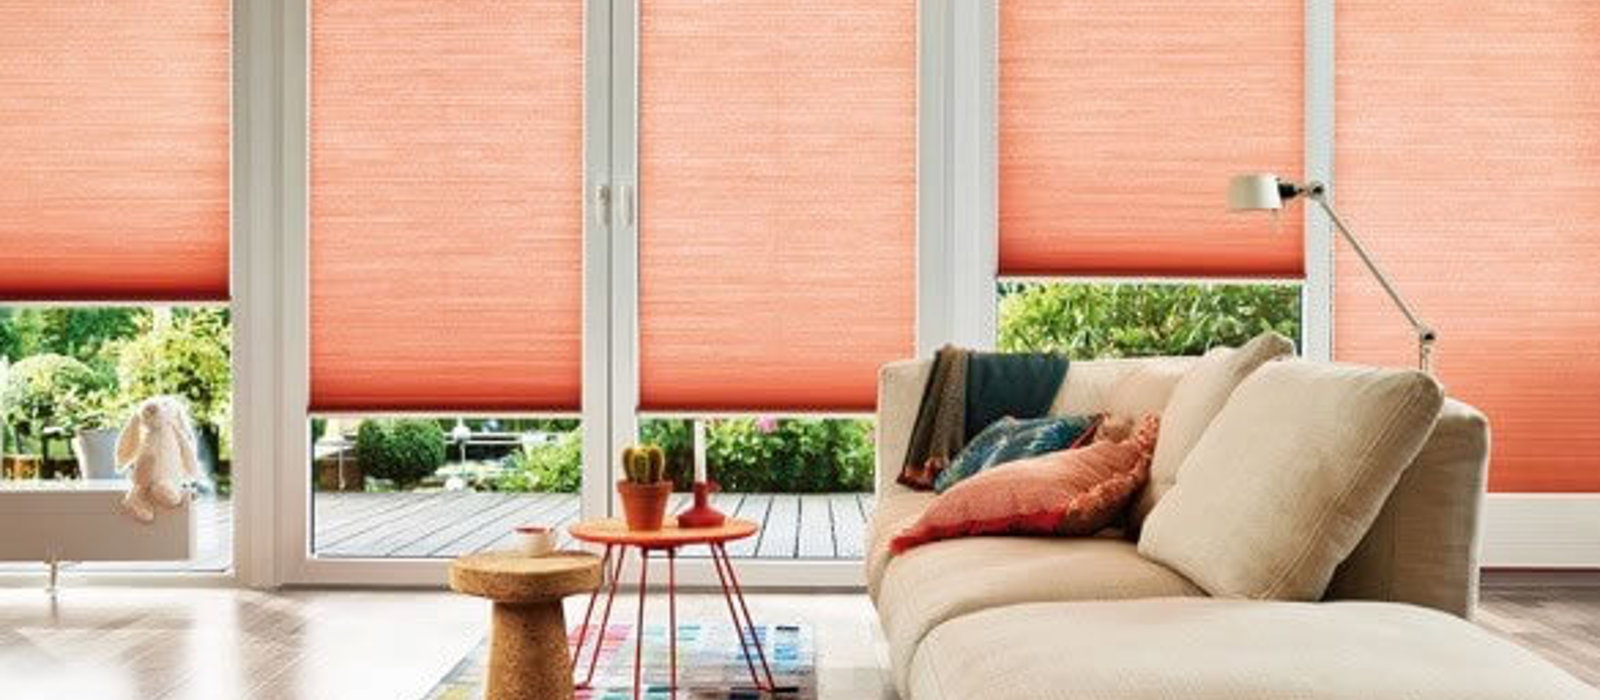 Colourful living space with large windows fitted with coral Duette blinds to keep the heat out